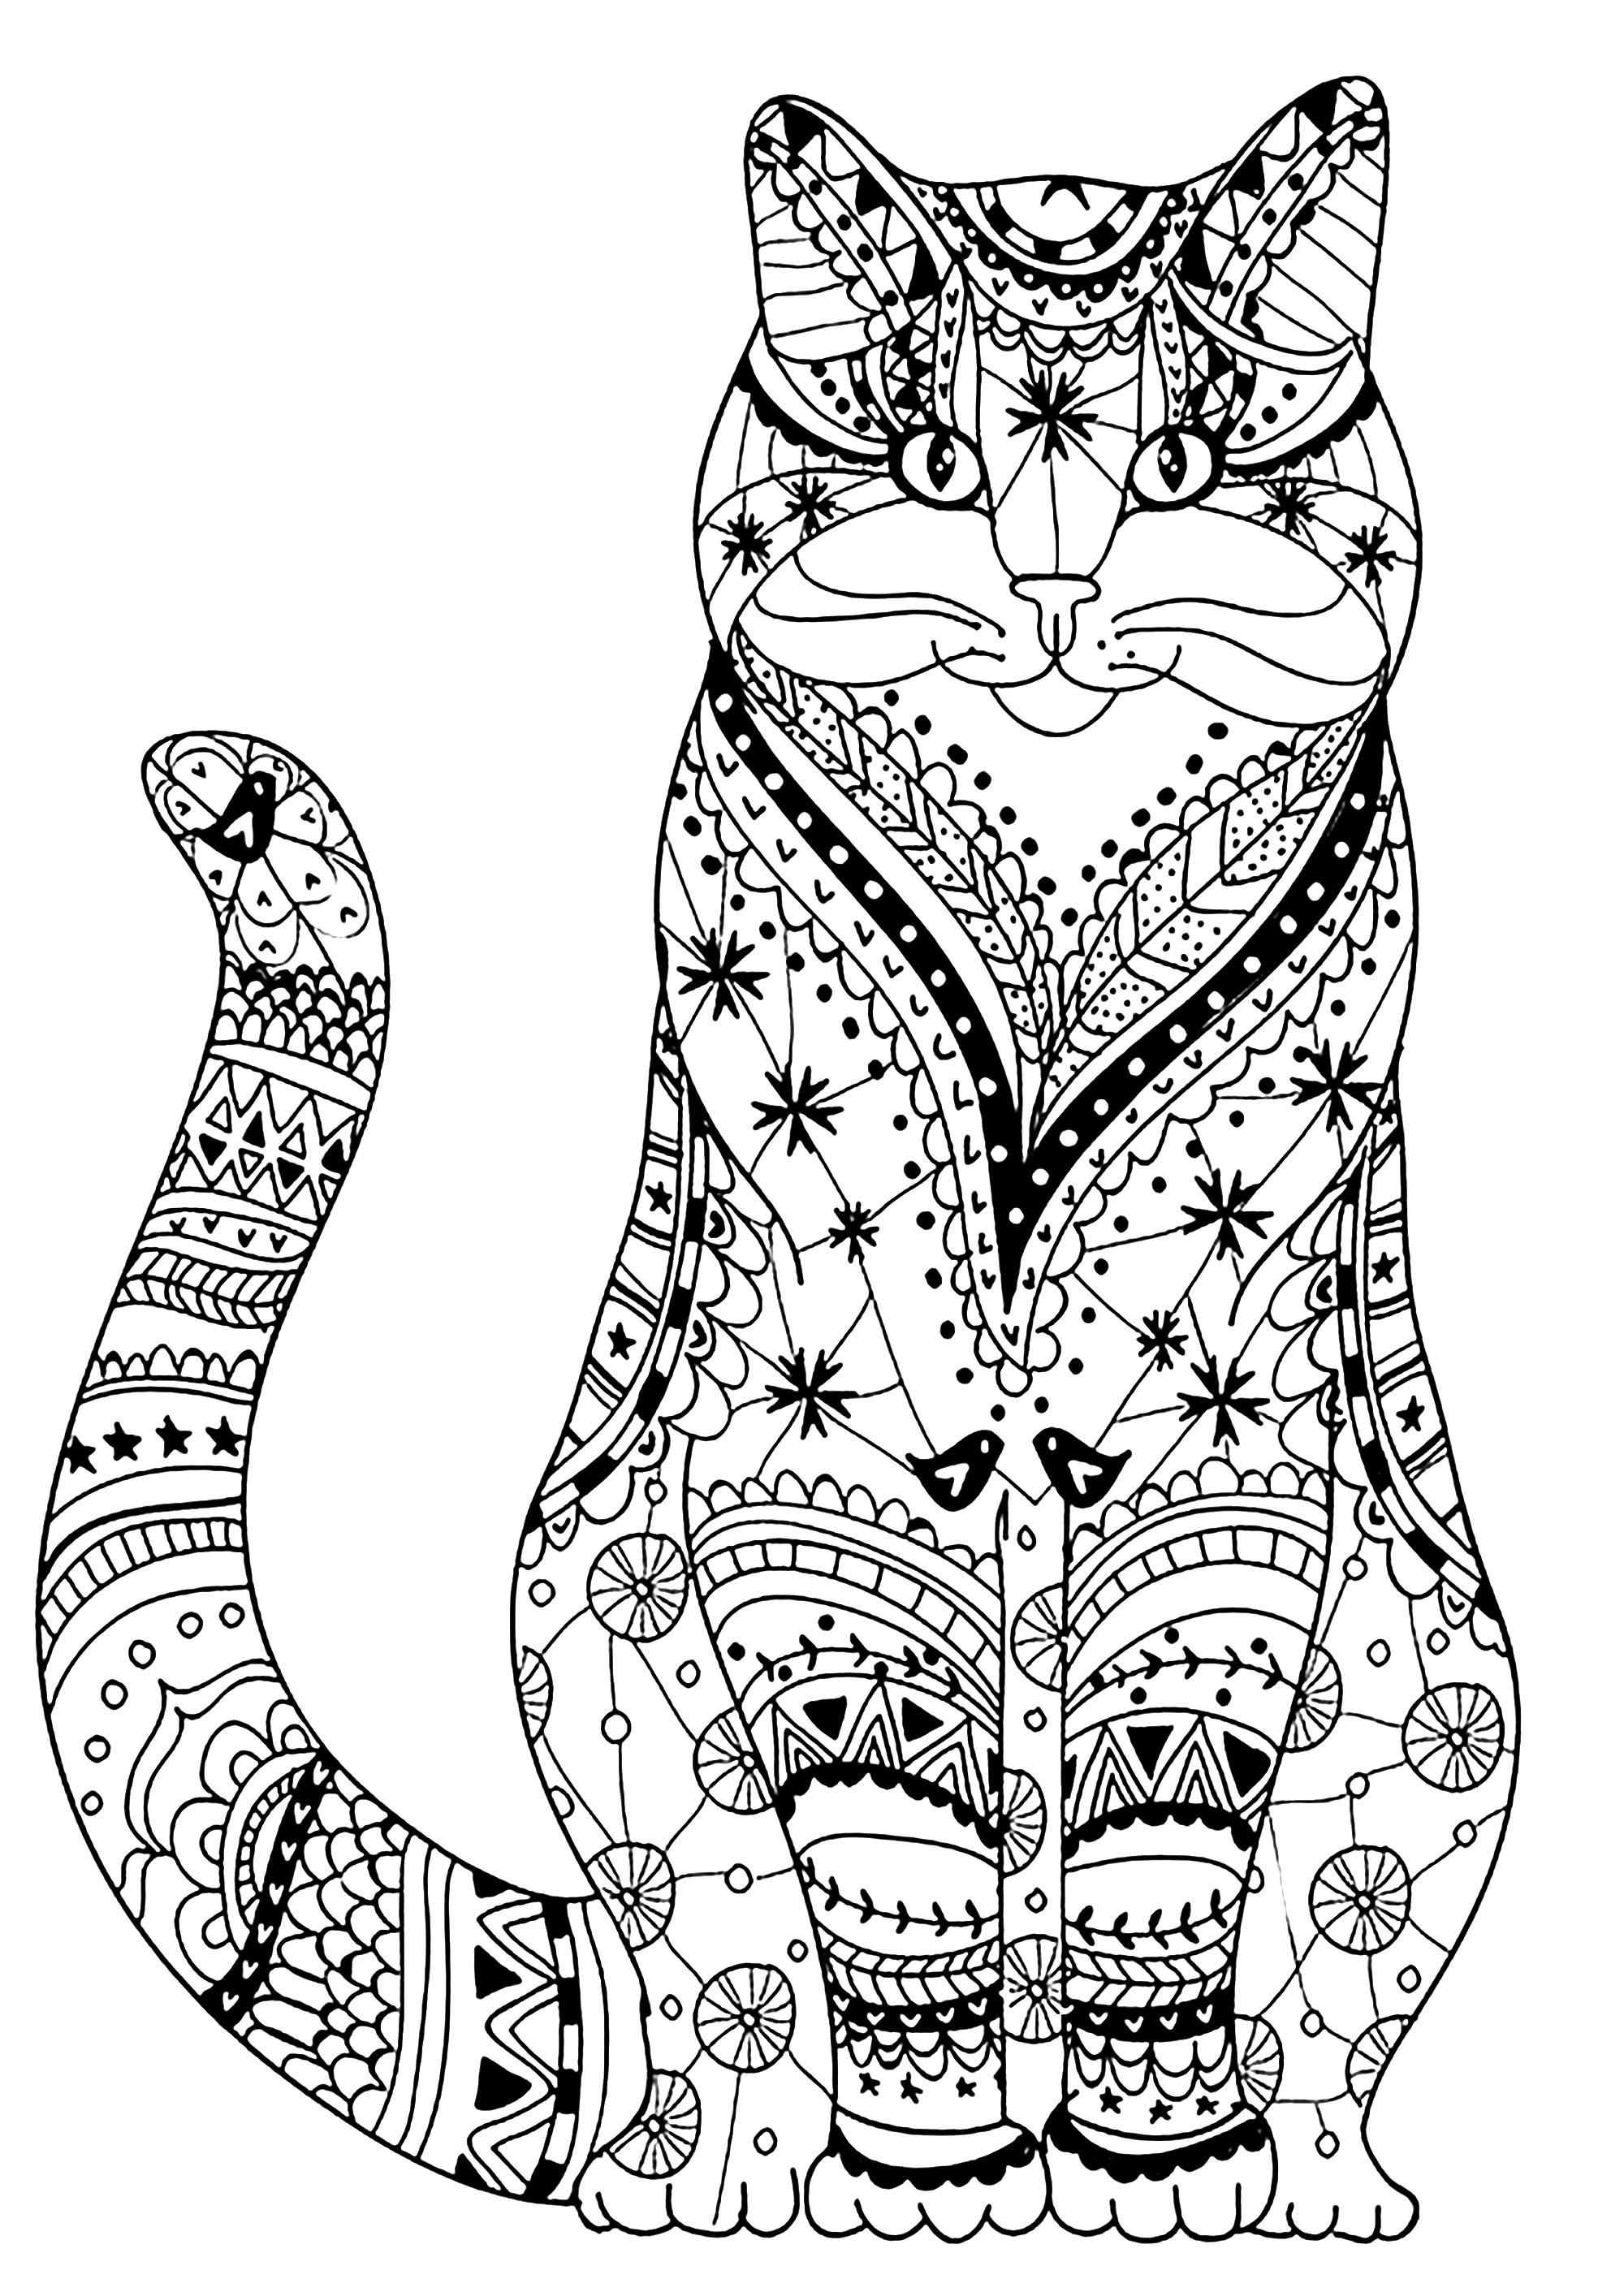 Download Very wise cat - Cats Adult Coloring Pages